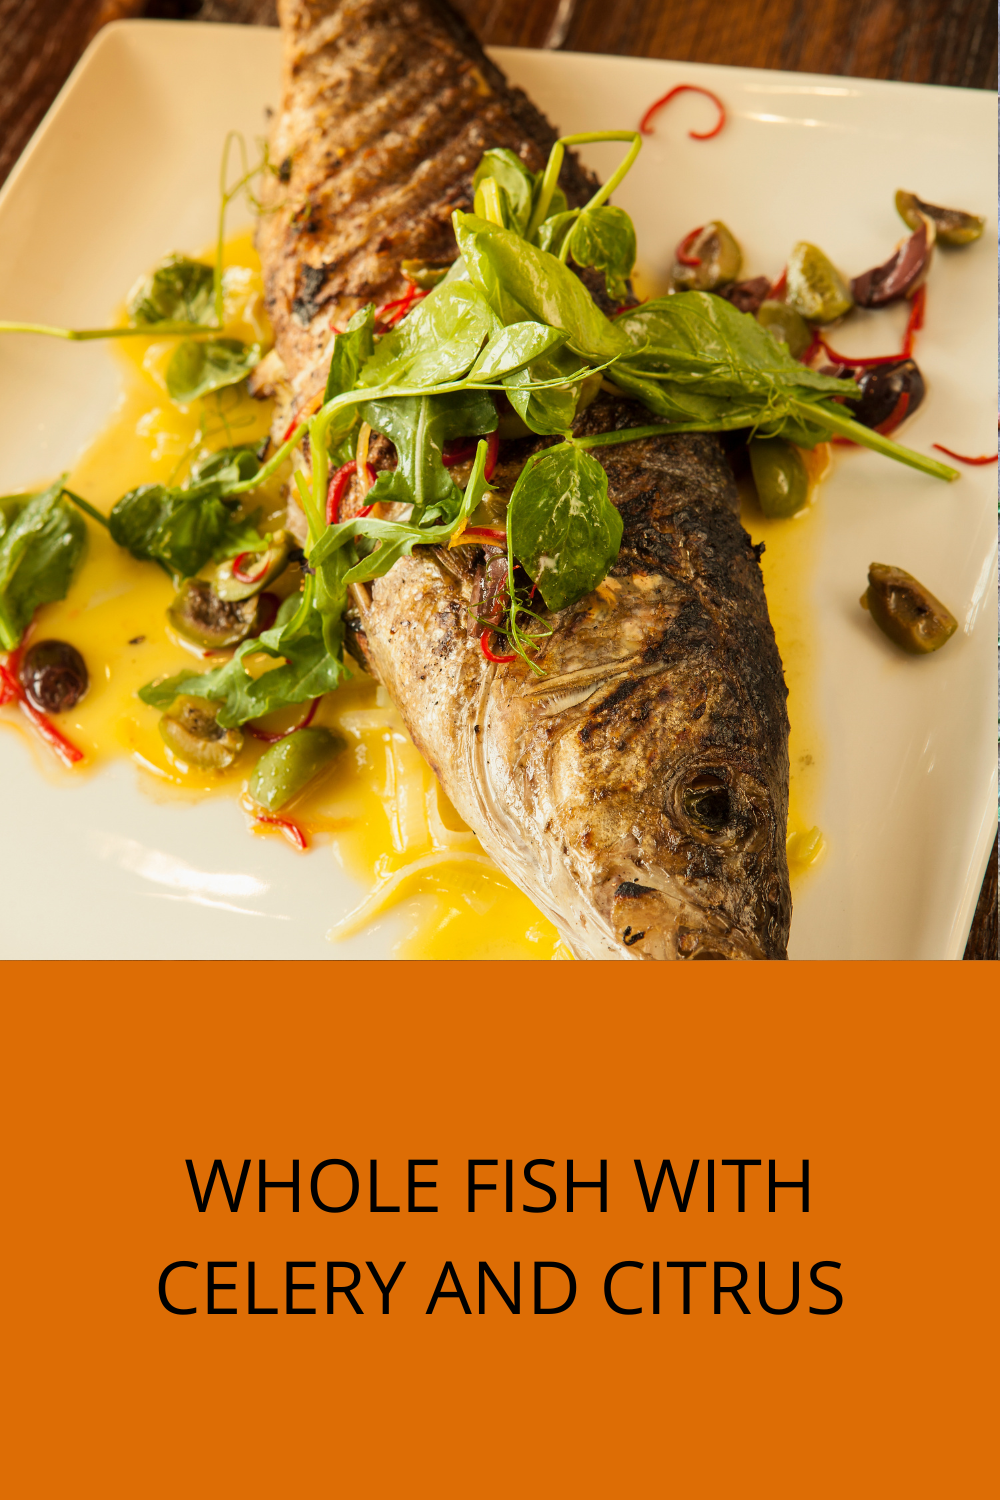 WHOLE FISH WITH CELERY AND CITRUS